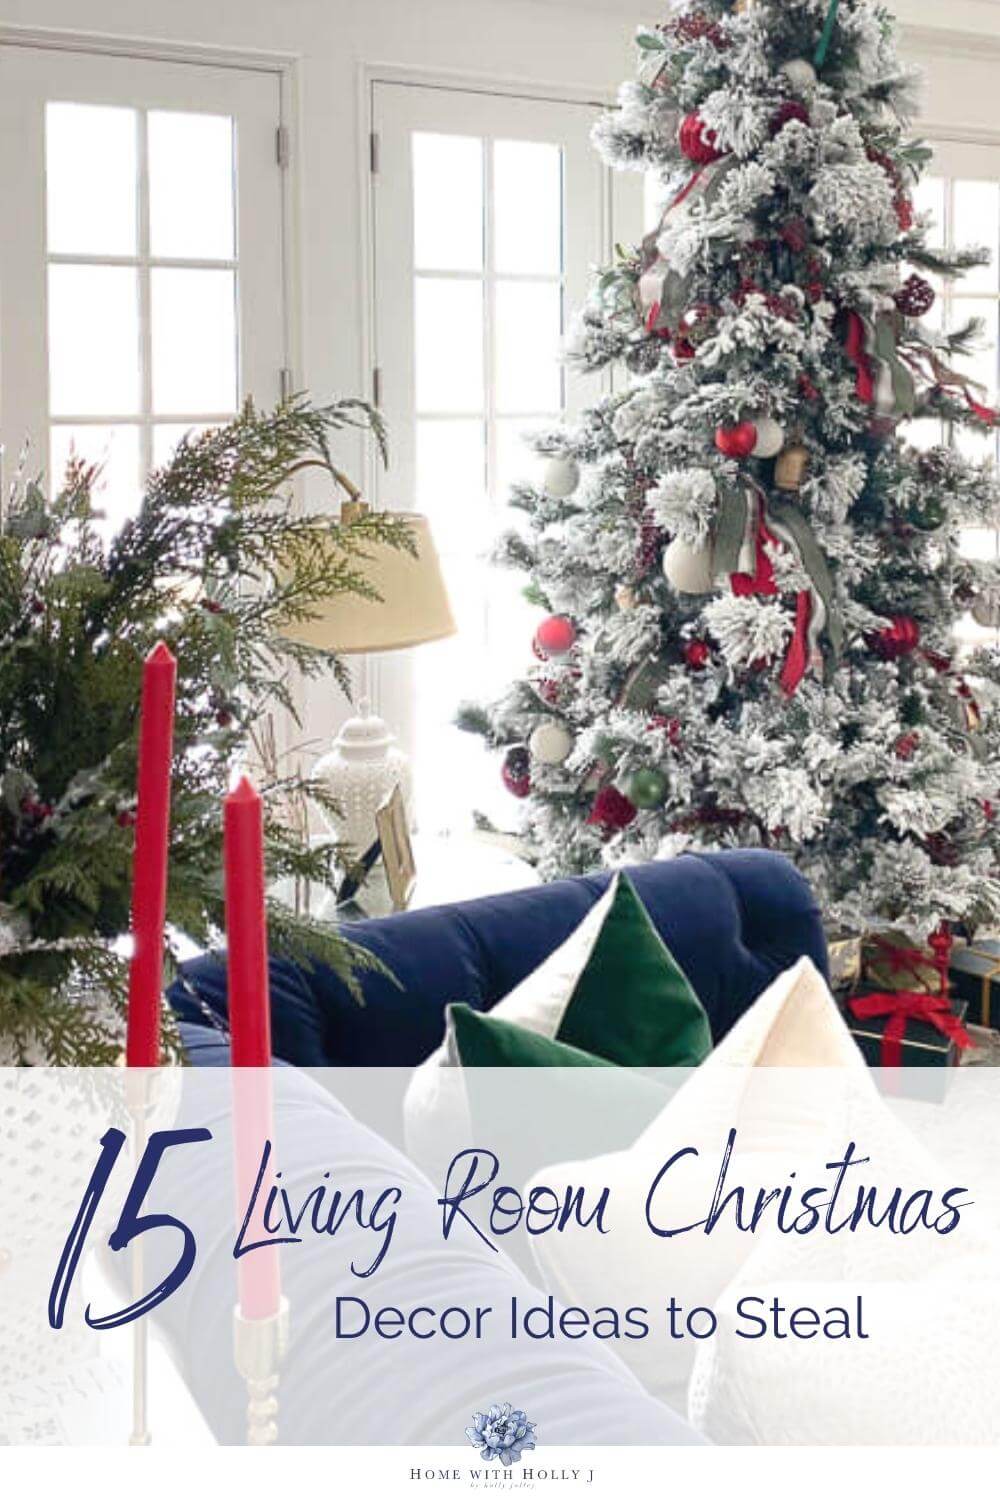 Want a fresh new take on the traditional red and green decor for your living room? Get inspired with my living room Christmas decor ideas here.